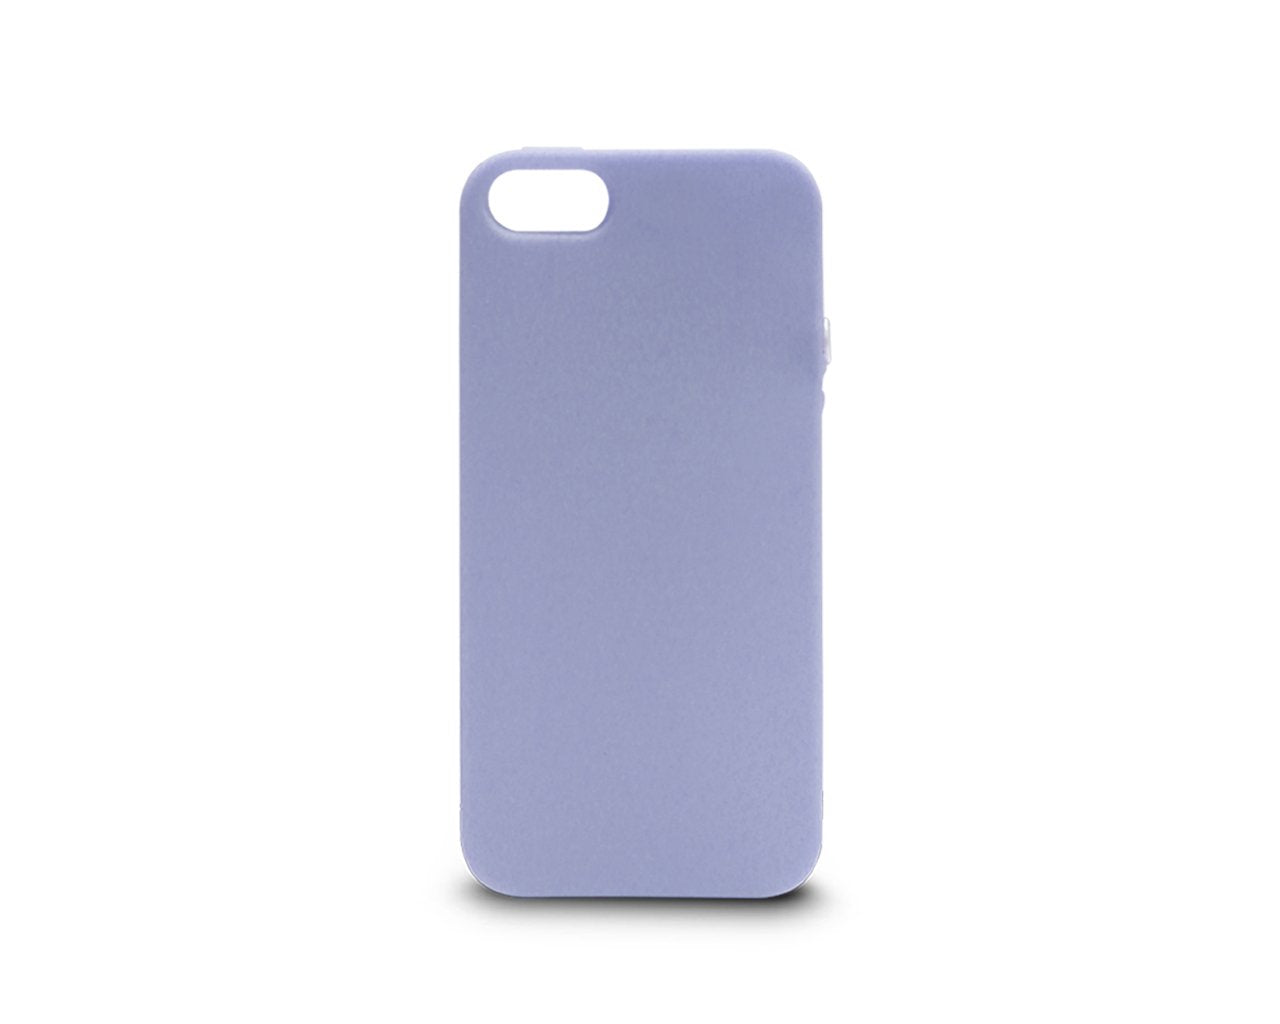 The Joy Factory Jugar Soft Silicone Case with Metal Frame for iPhone5/5S, CSD102 (Purple)